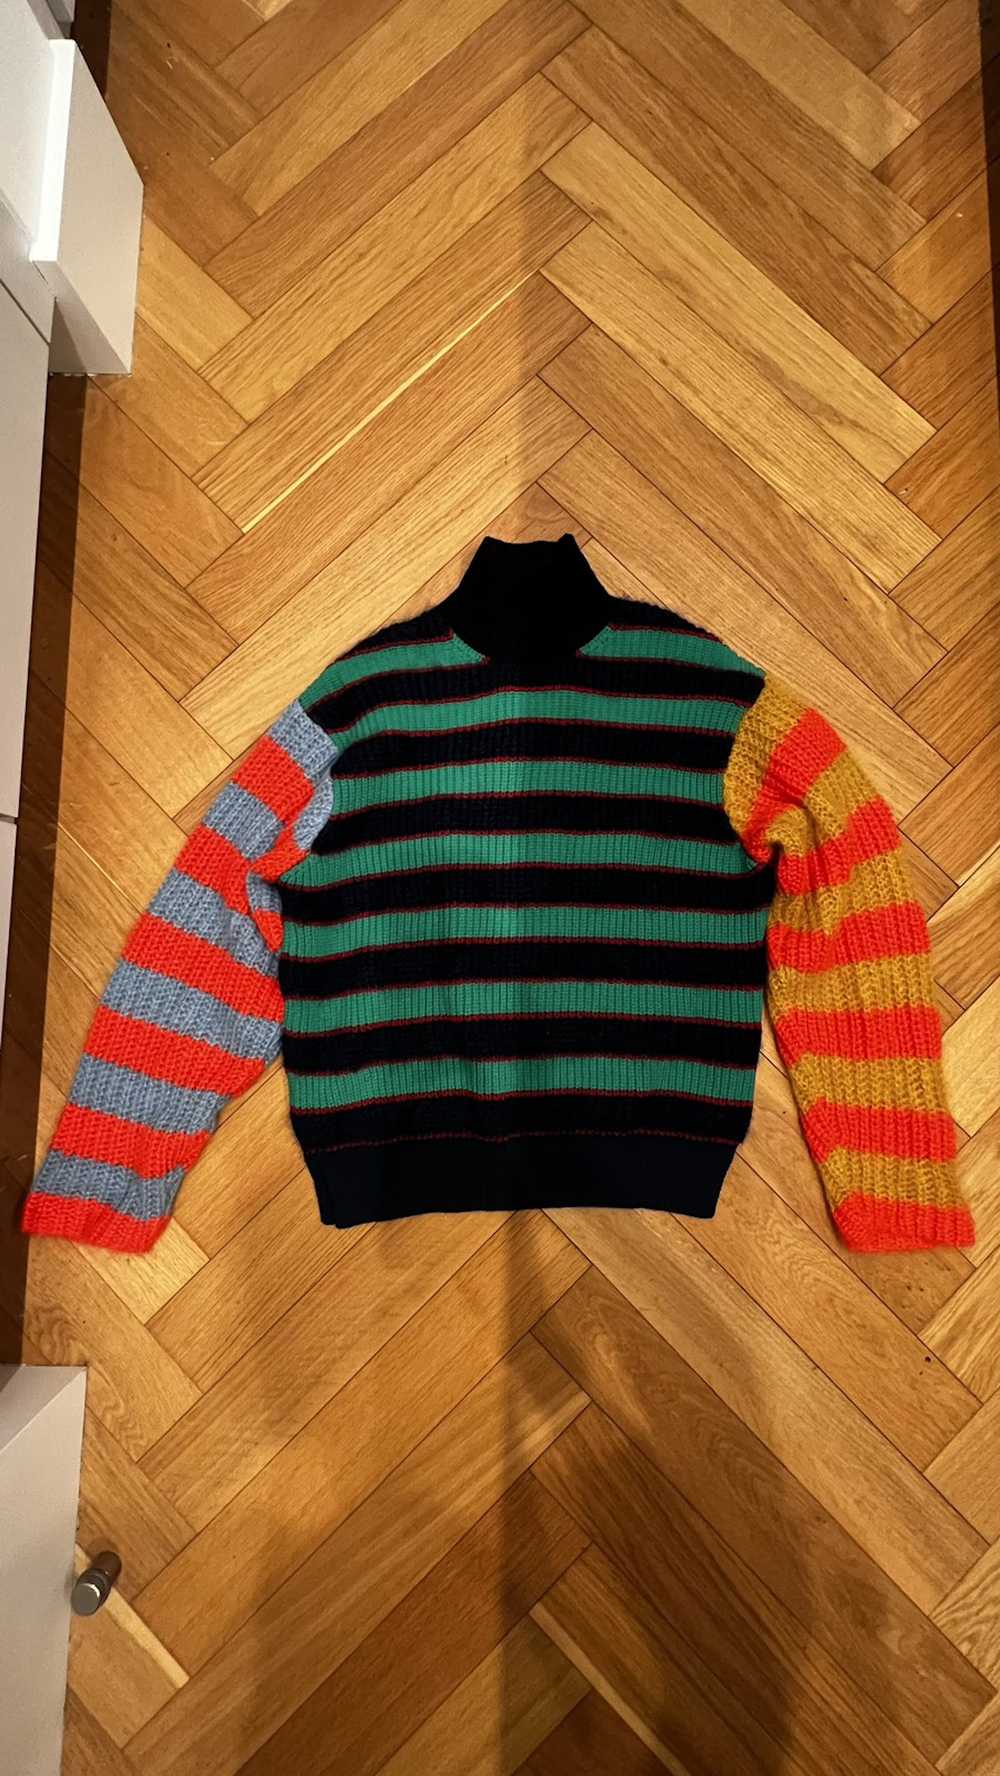 Kenzo KENZO Collection Momento 3 Knit Sweater - image 1